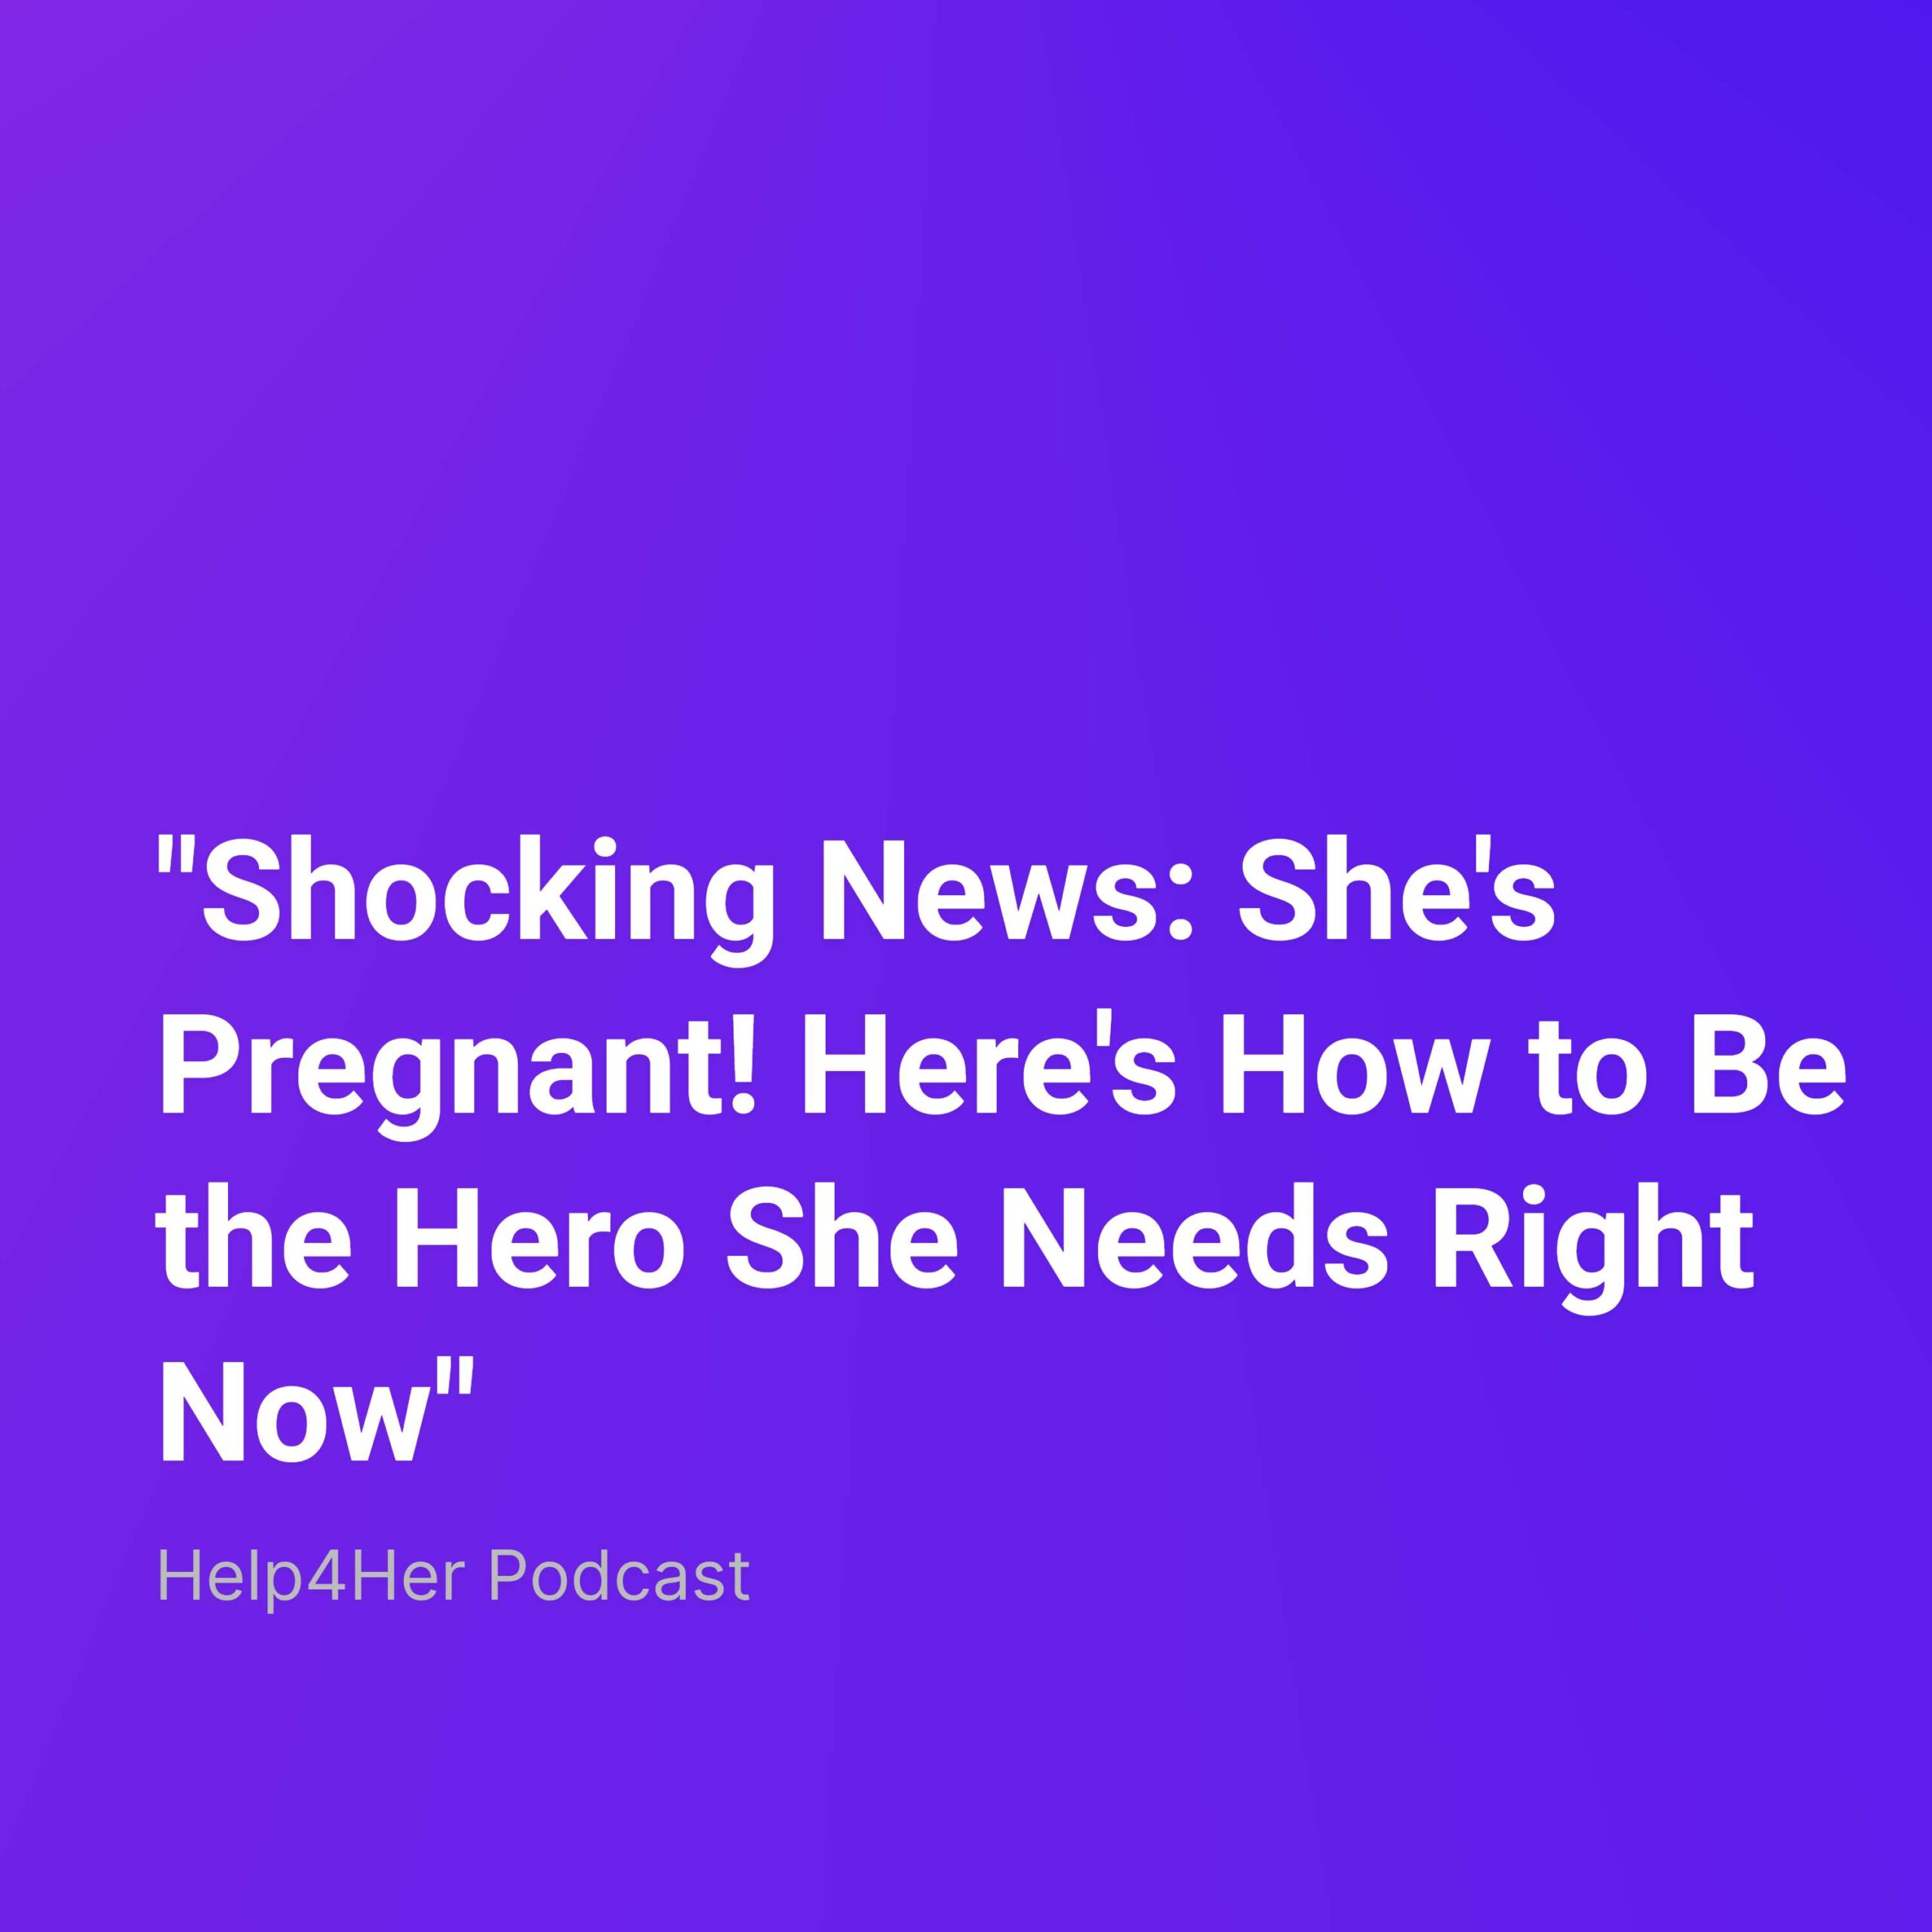 “Shocking News: She’s Pregnant! Here’s How to Be the Hero She Needs Right Now”